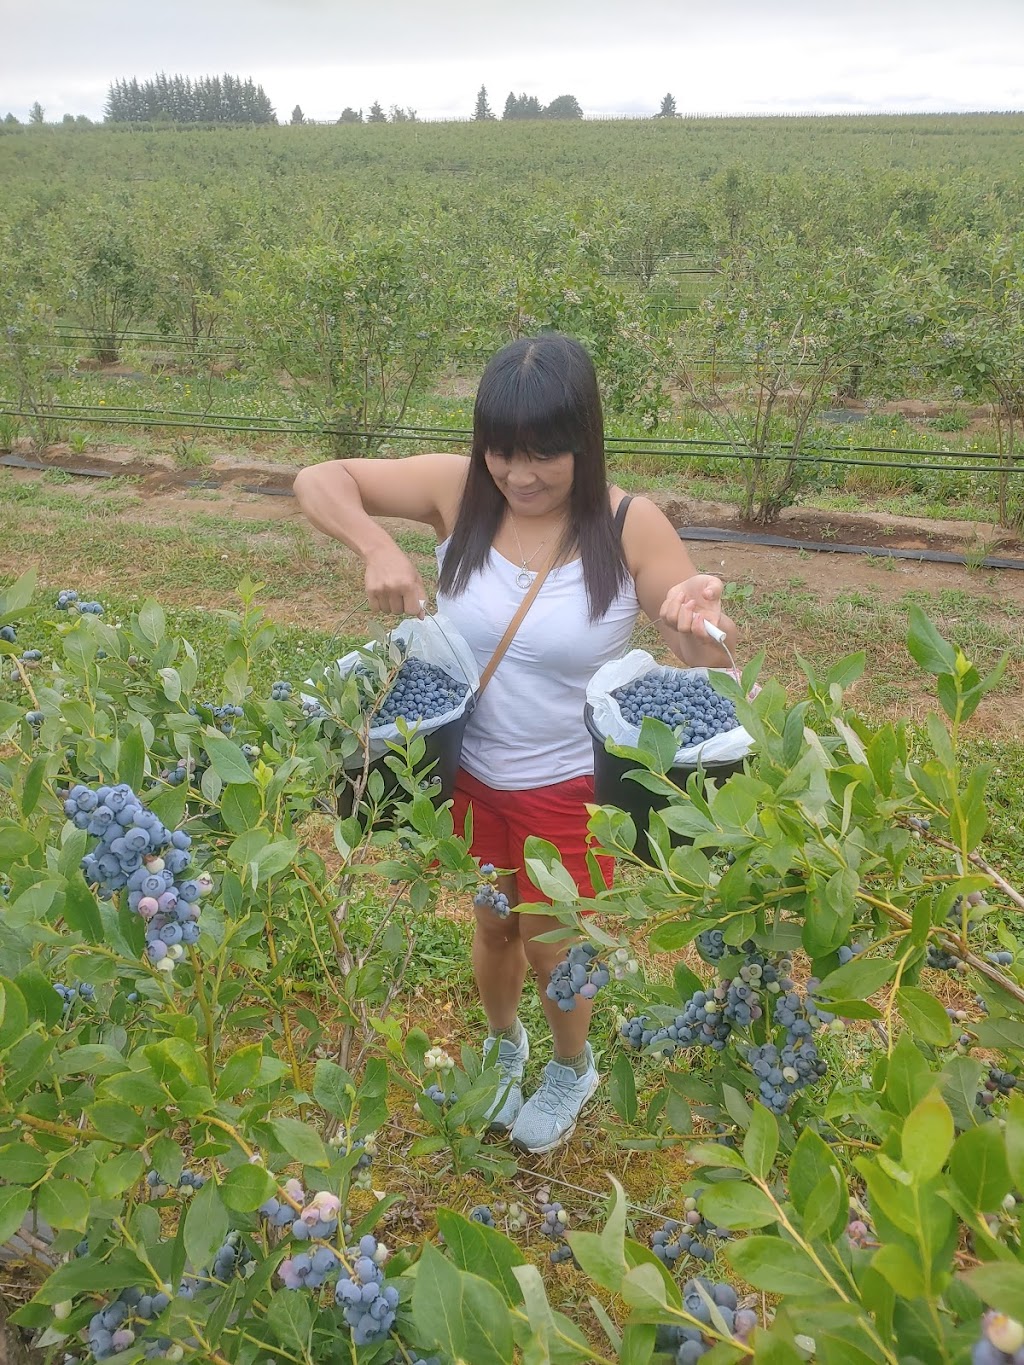 Nappe Farms- U Pick Blueberries | 10280 SE Orient Dr, Boring, OR 97009, USA | Phone: (503) 663-0885